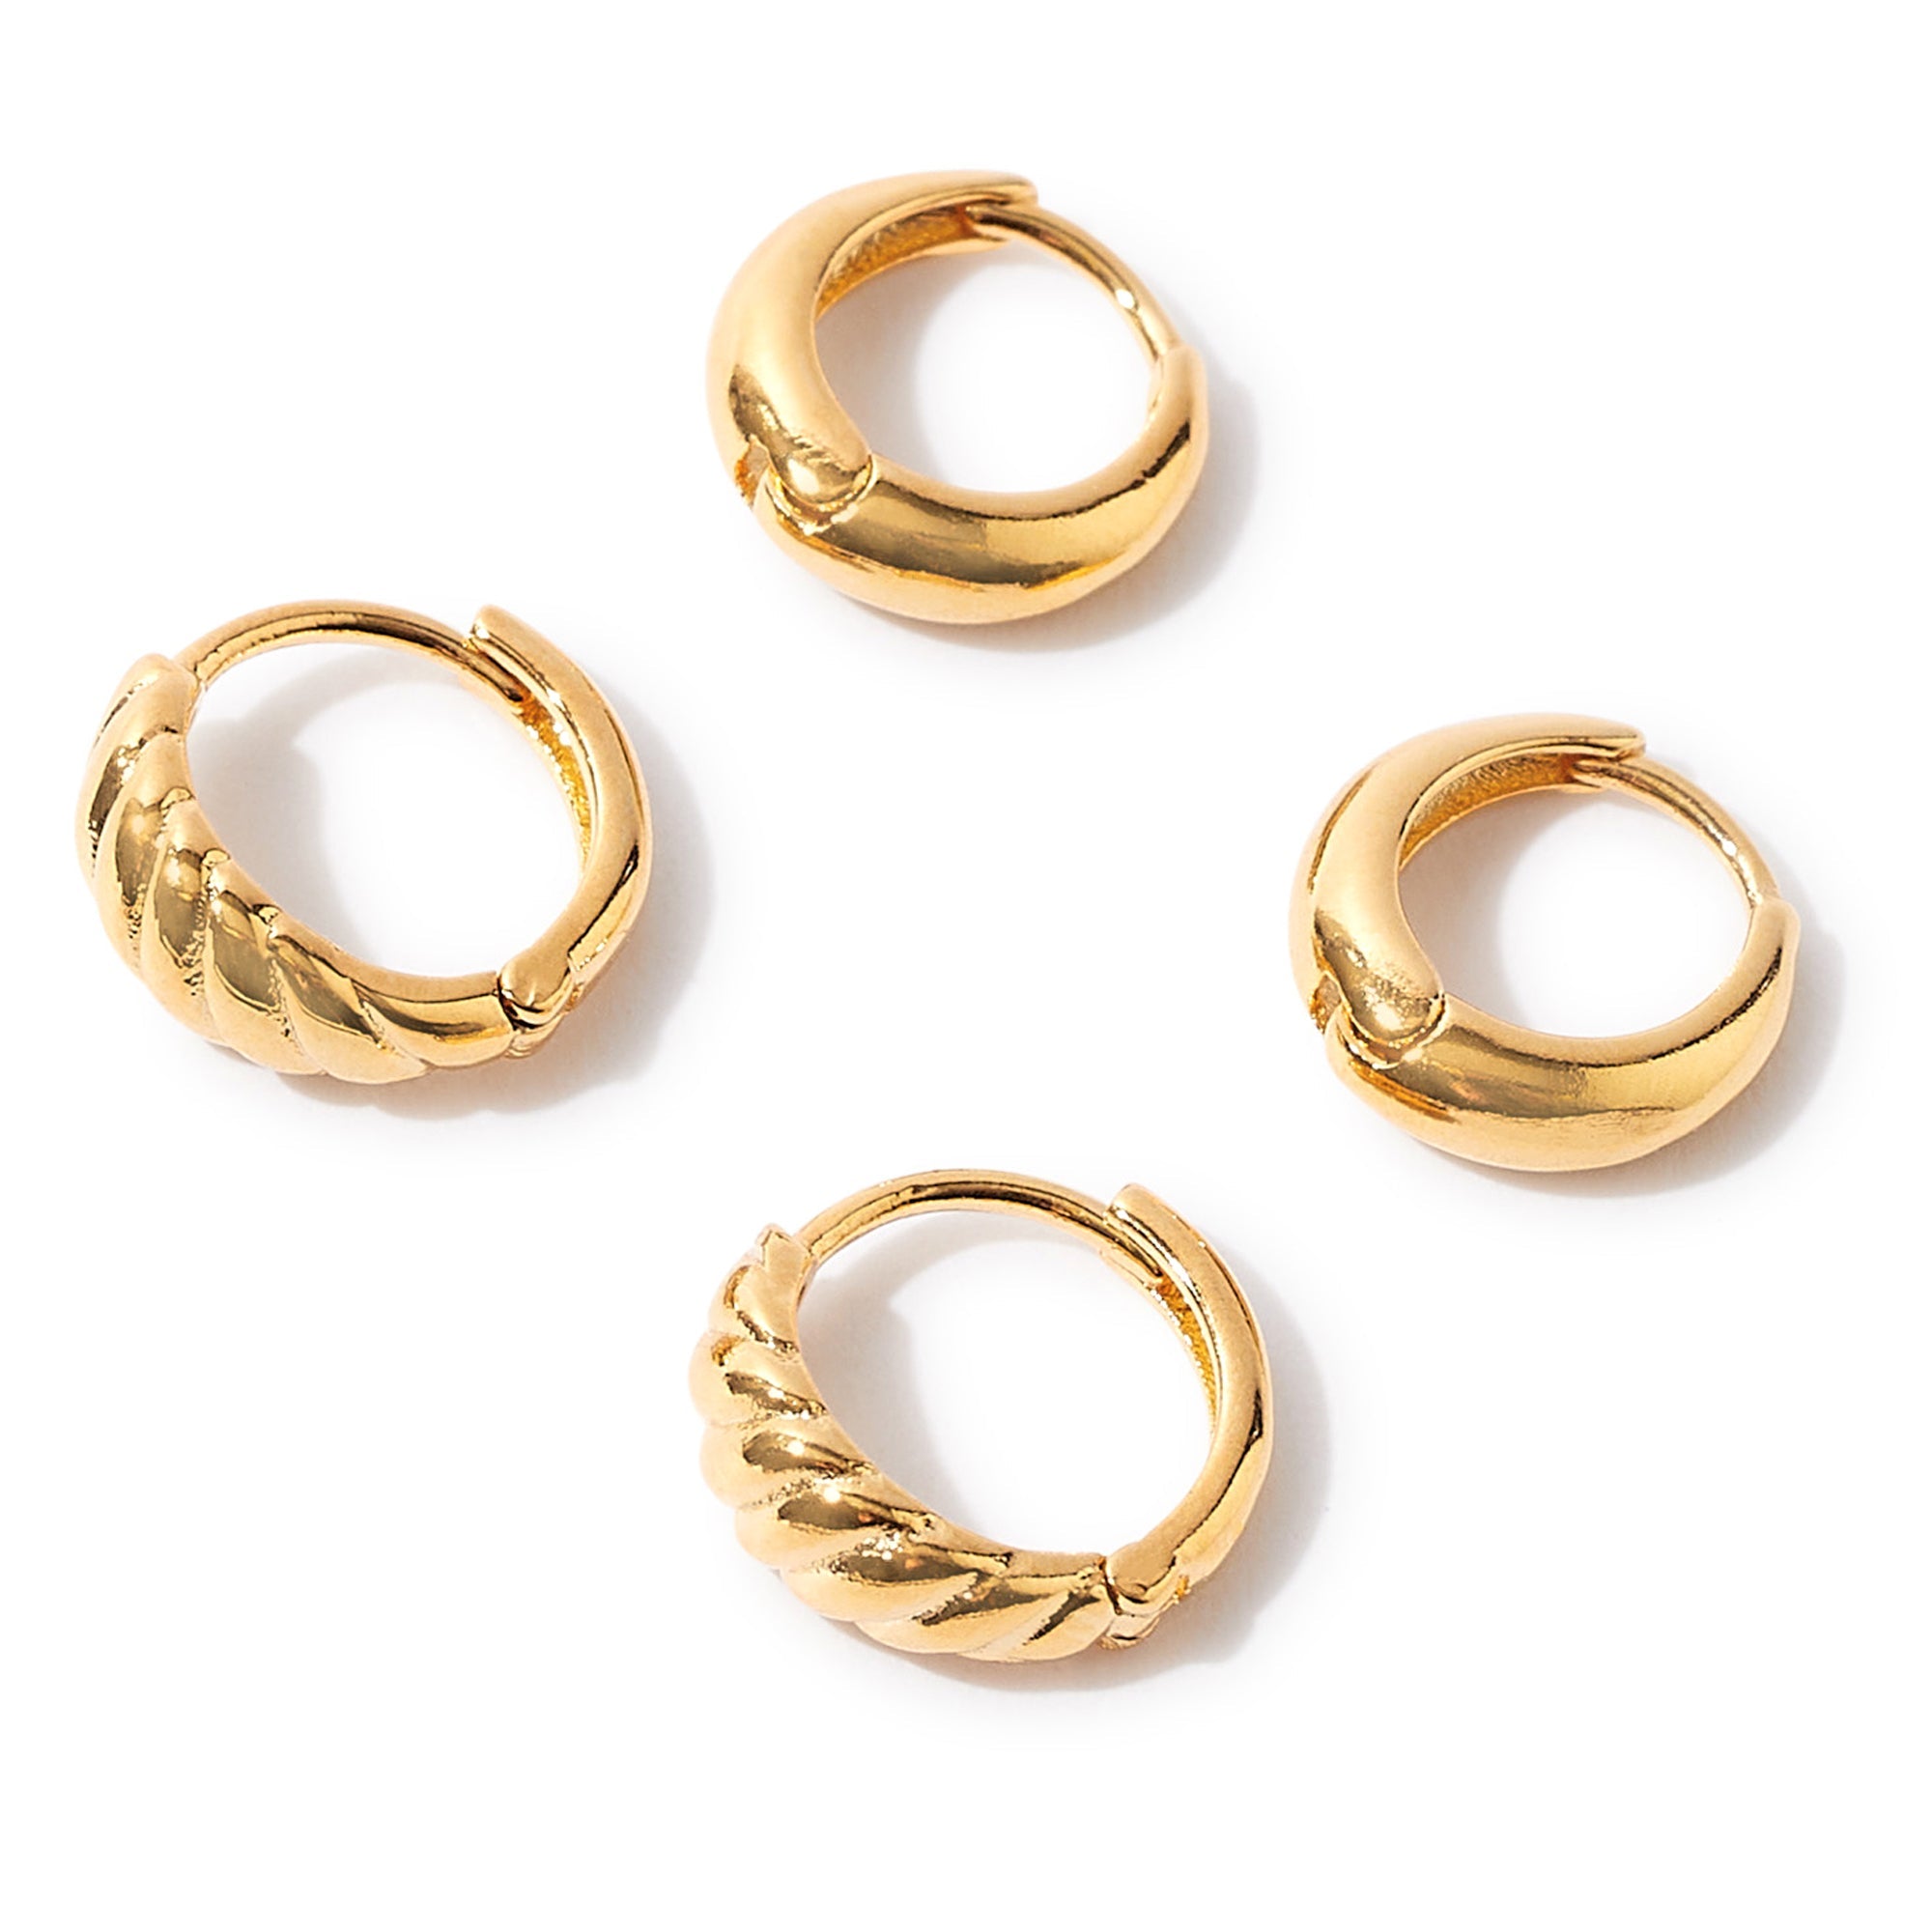 Real Gold Plated 2 Pack Twisted And Plain Hoop Earring For Women By Accessorize London